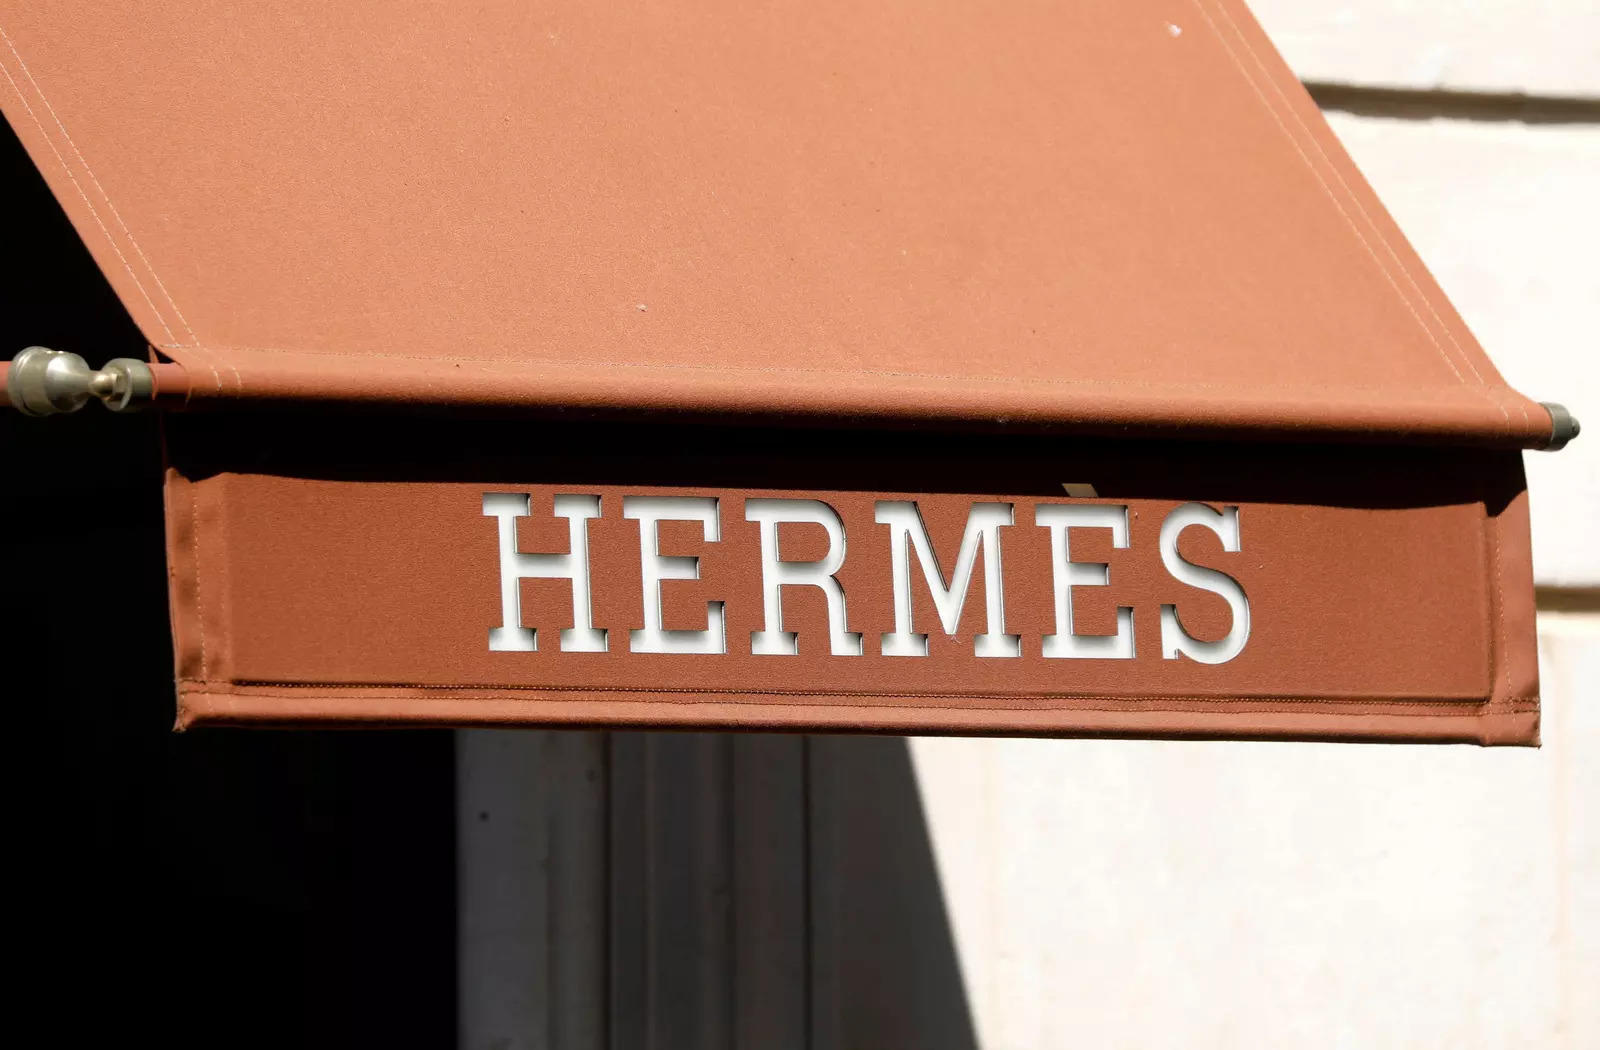 Hermes bounces back in China as margin hits record high